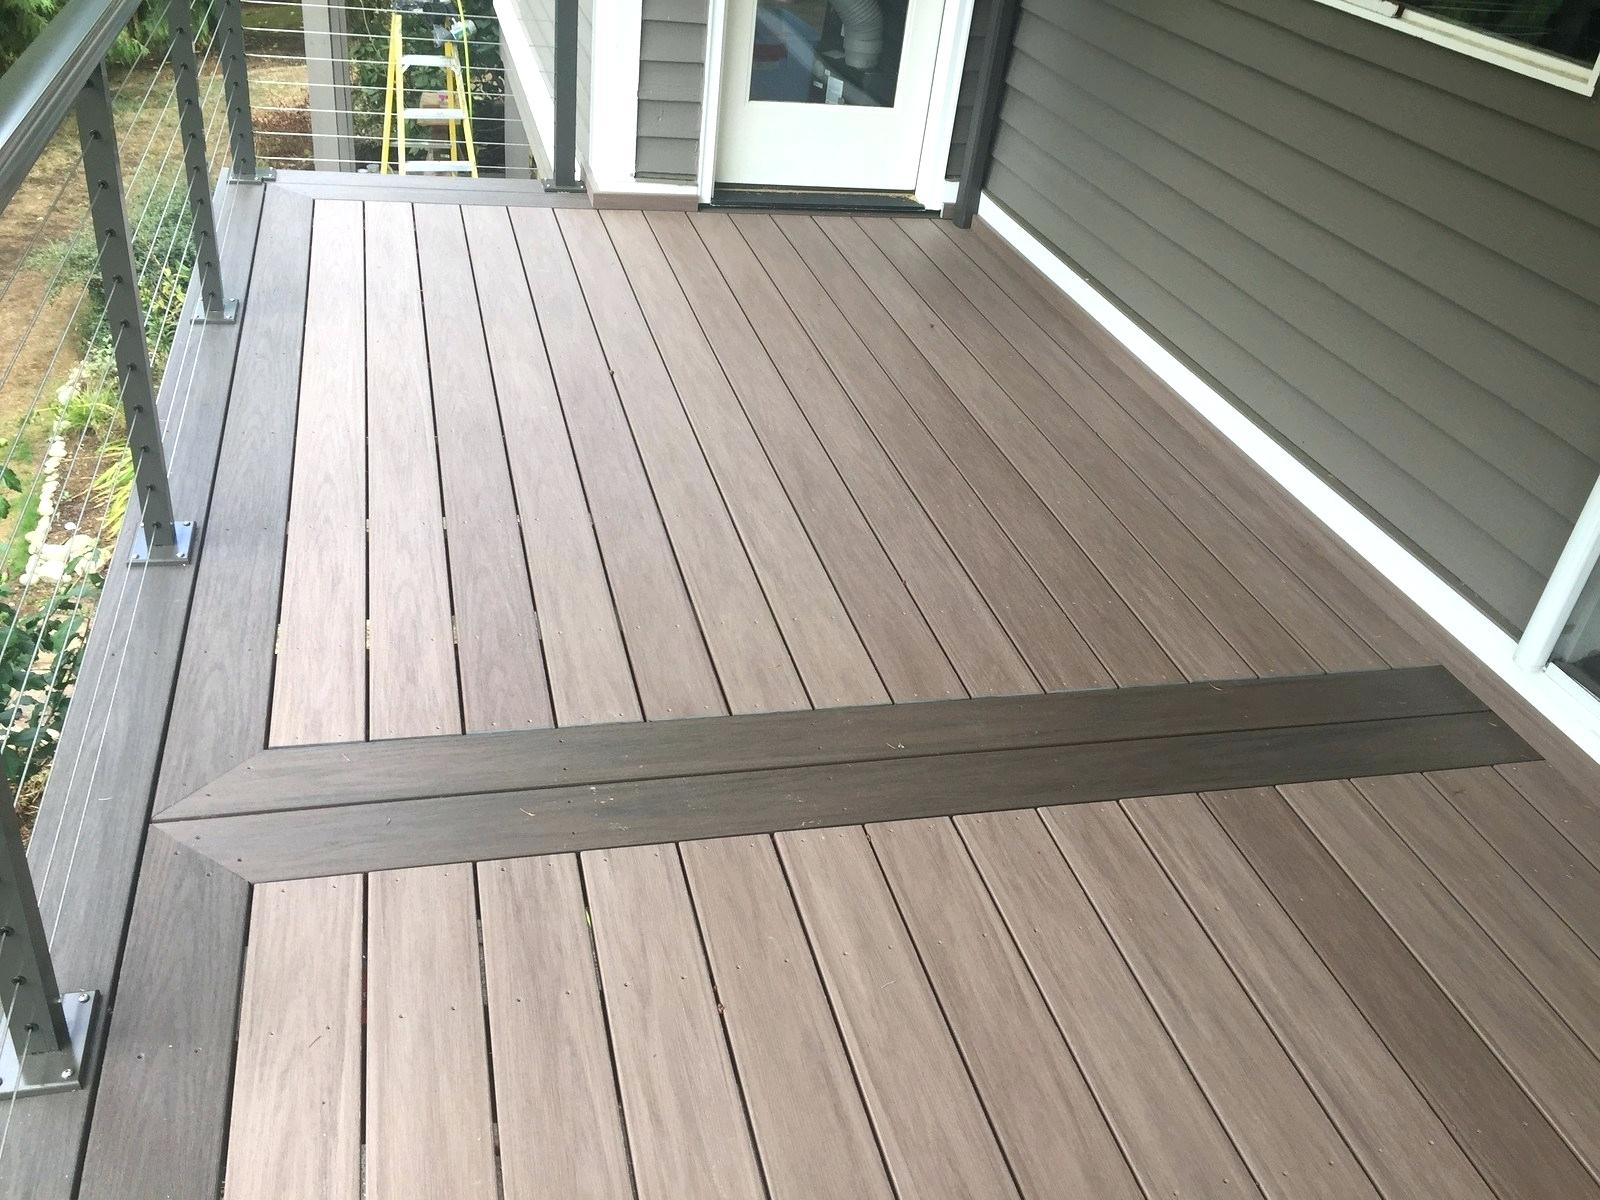 Wolf Pvc Decking Wolf Decking Home Products Photo Keywords With within sizing 1600 X 1200